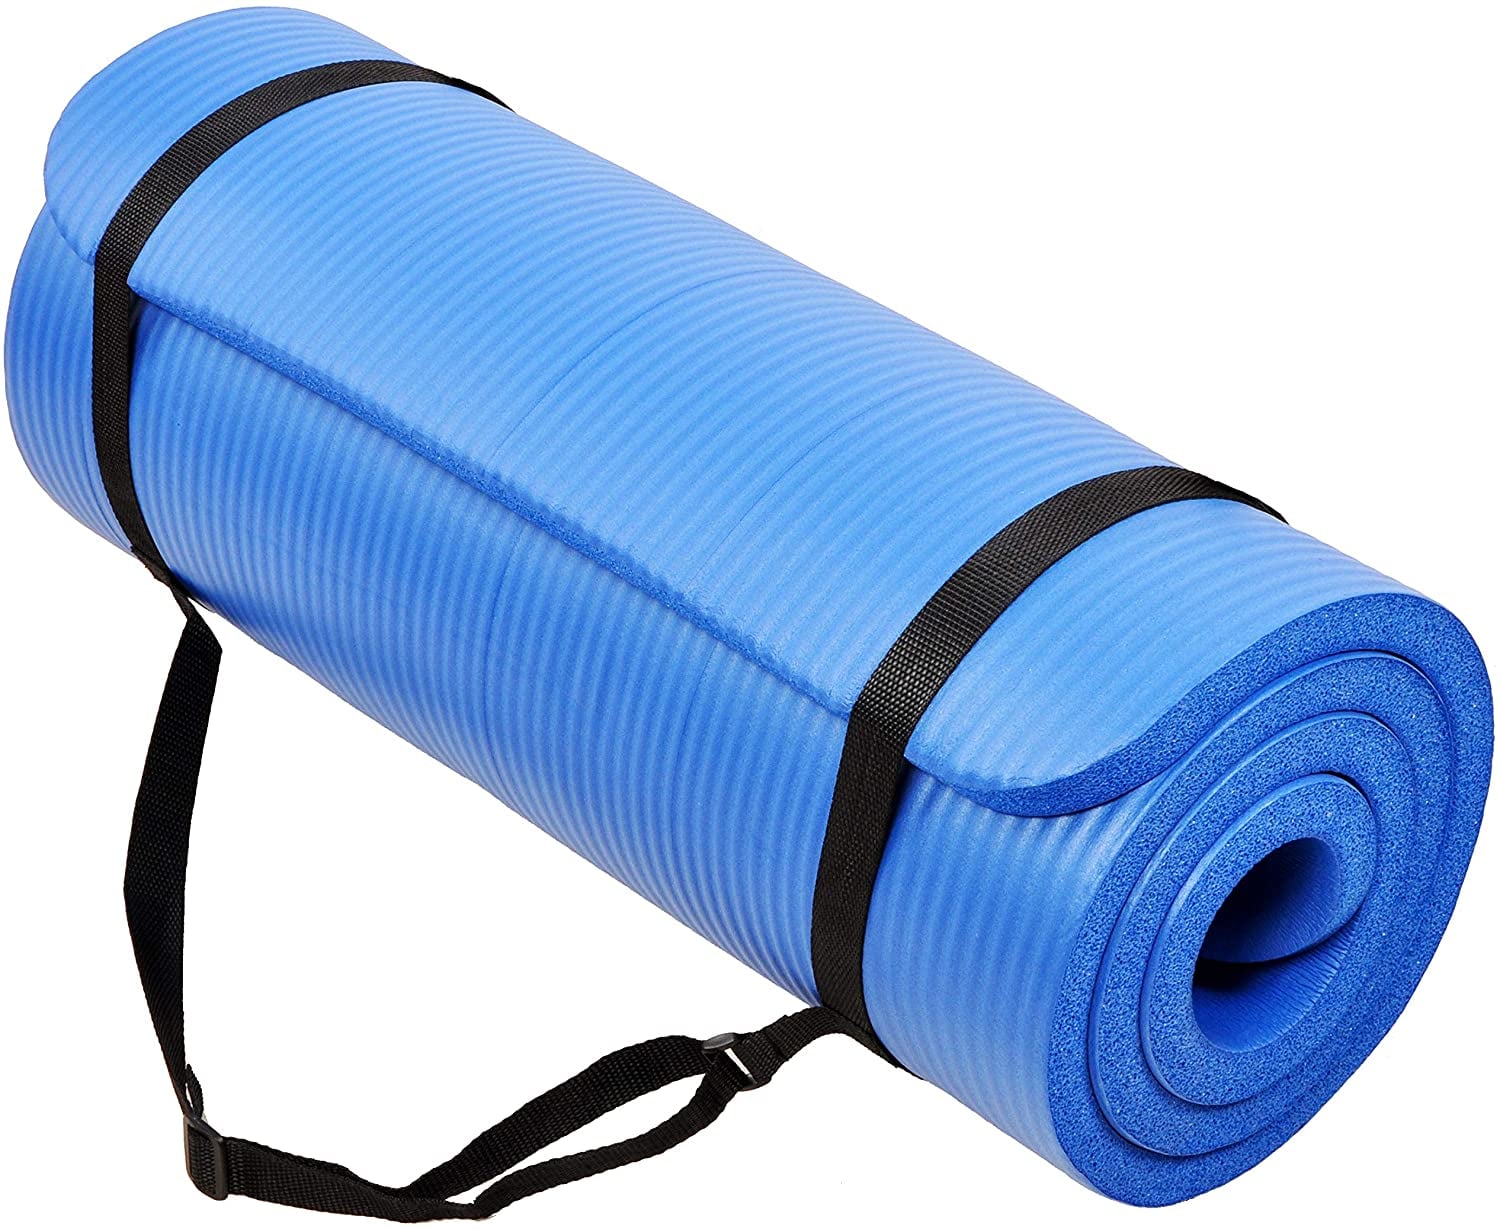 5 Of The Cutest Yoga Mats To Start Your Day Off Right - 21Ninety